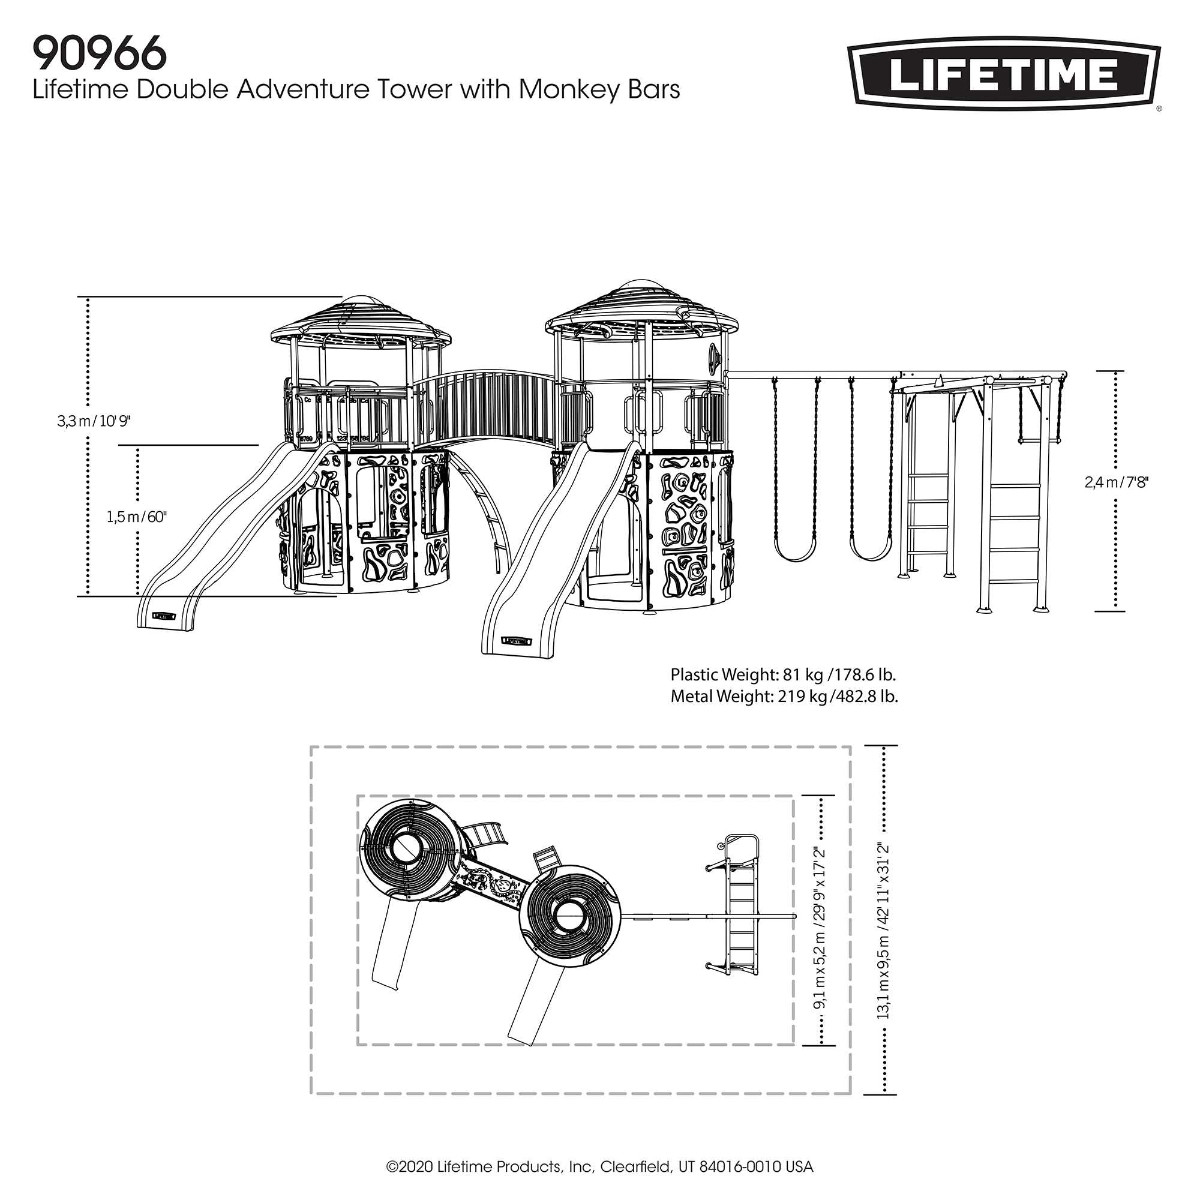 Lifetime Double Adventure Tower with Monkey Bars (90966) Spec Sheet